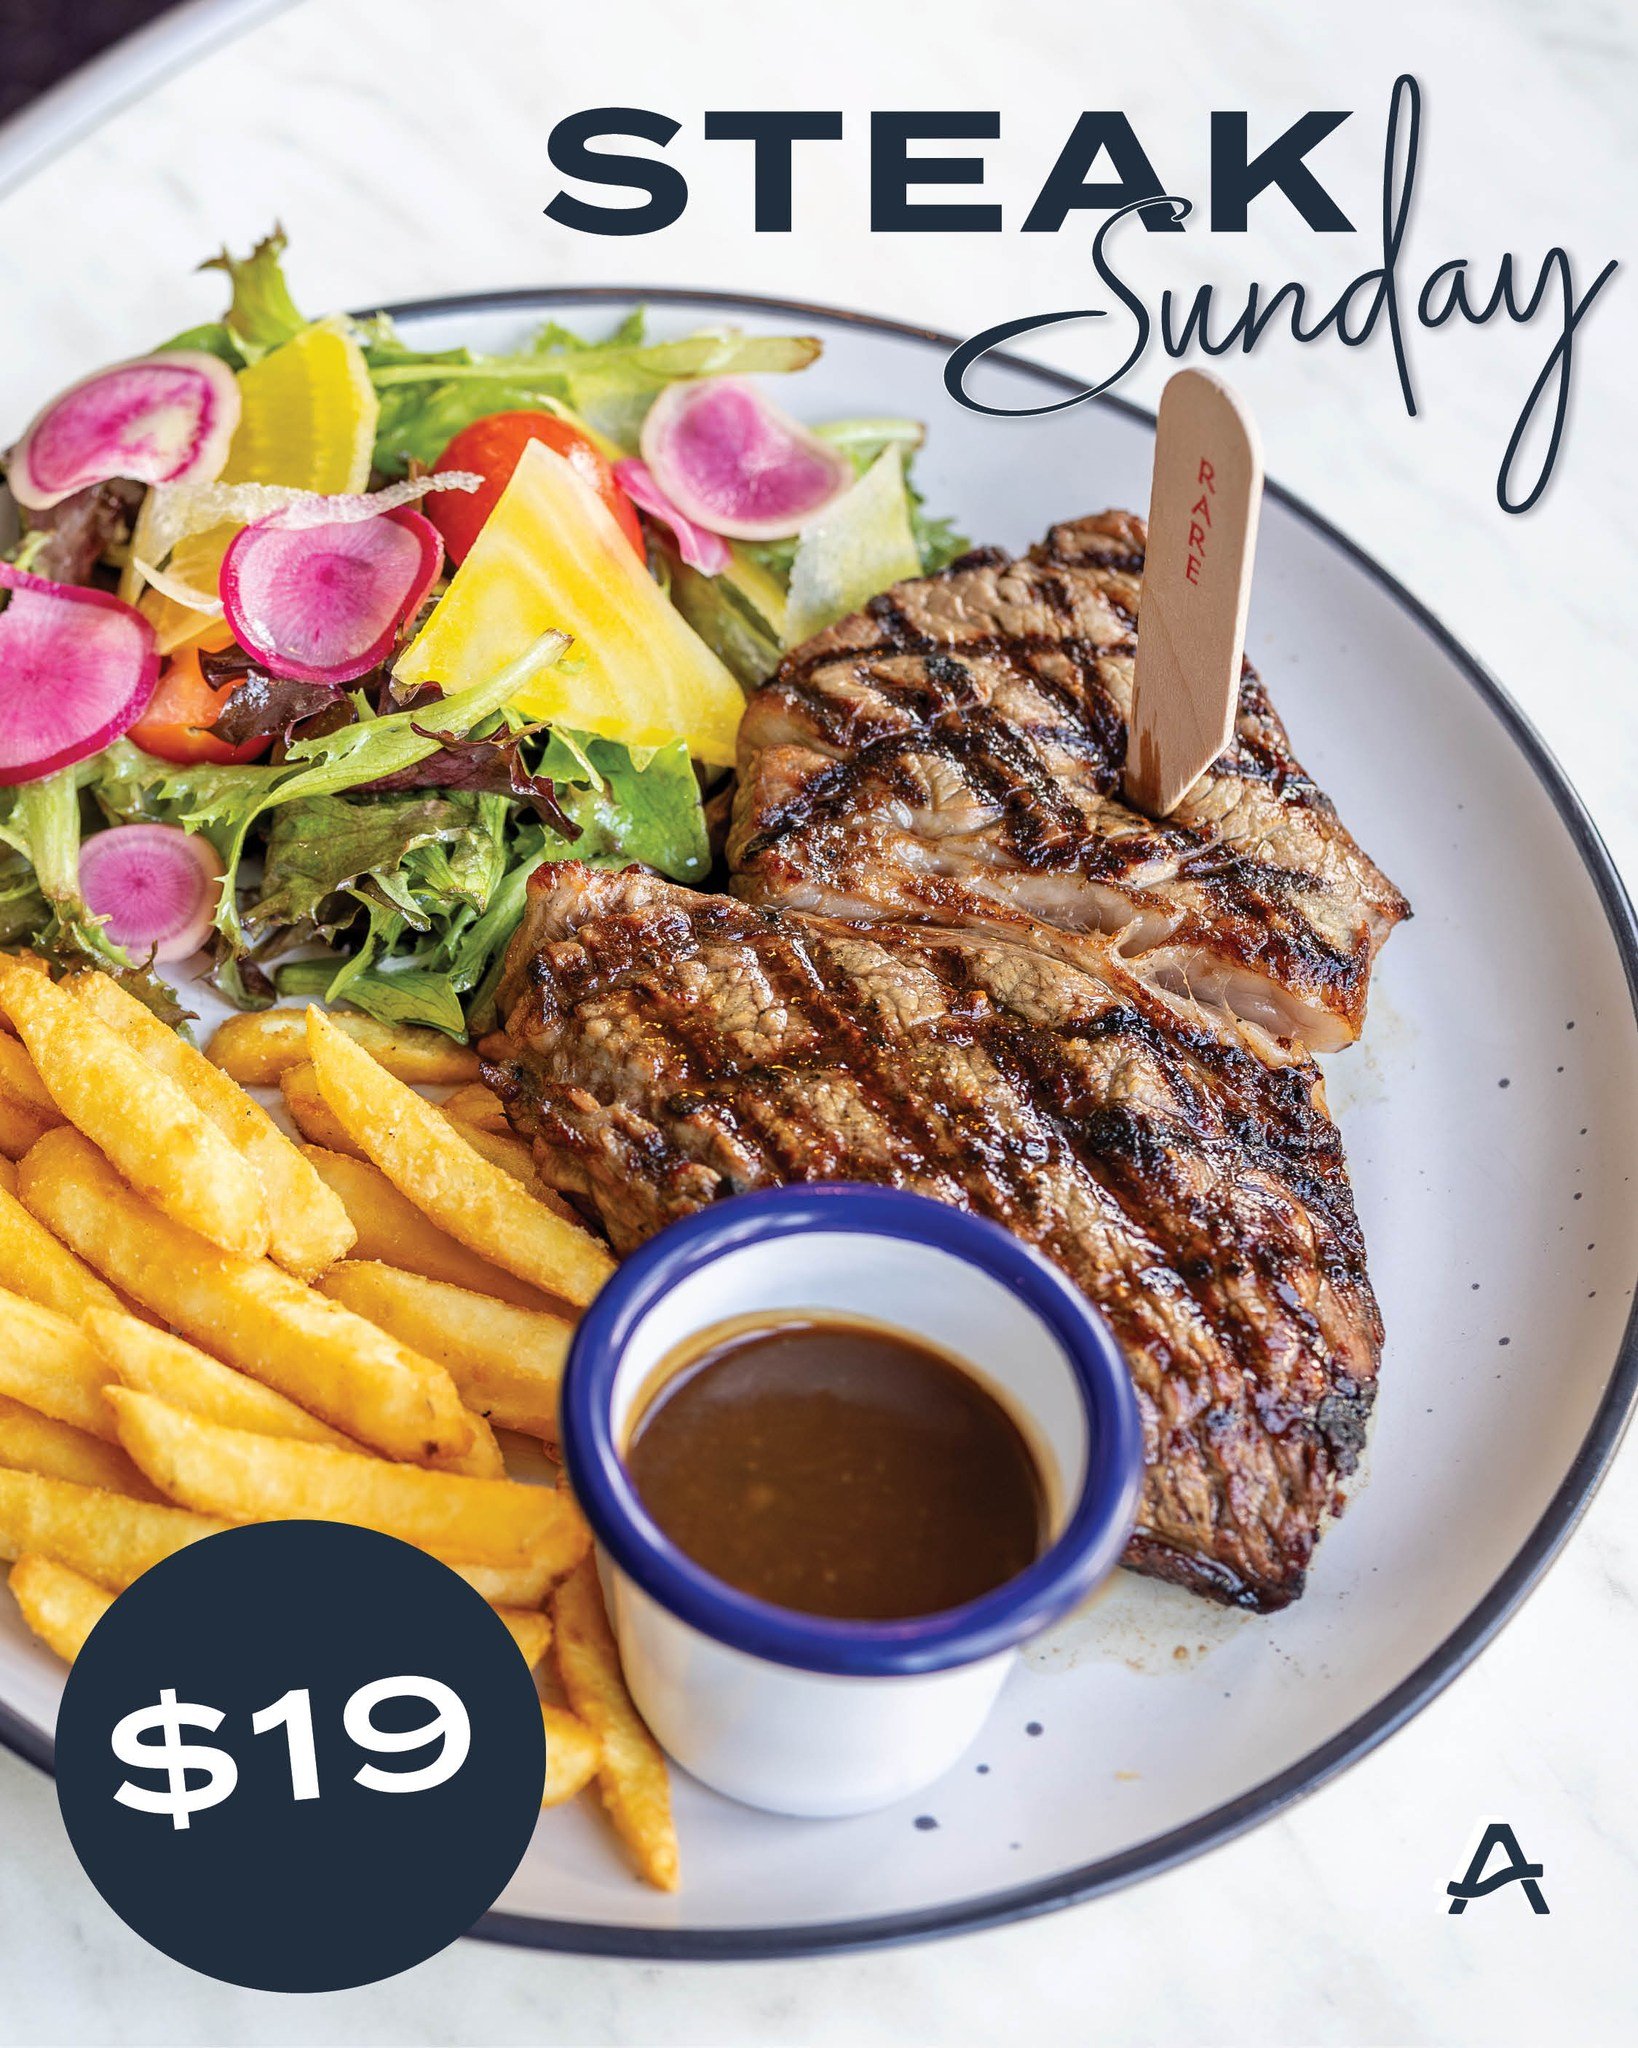 🌟 Sunday nights just got tastier at Ashmore Tavern!

Indulge in our delectable 200g Rump steak, complete with beer battered chips and gravy, all for just $19 (add a salad for $2).

Don't miss out on this juicy deal! 🥩🍽

Book a table now with the l